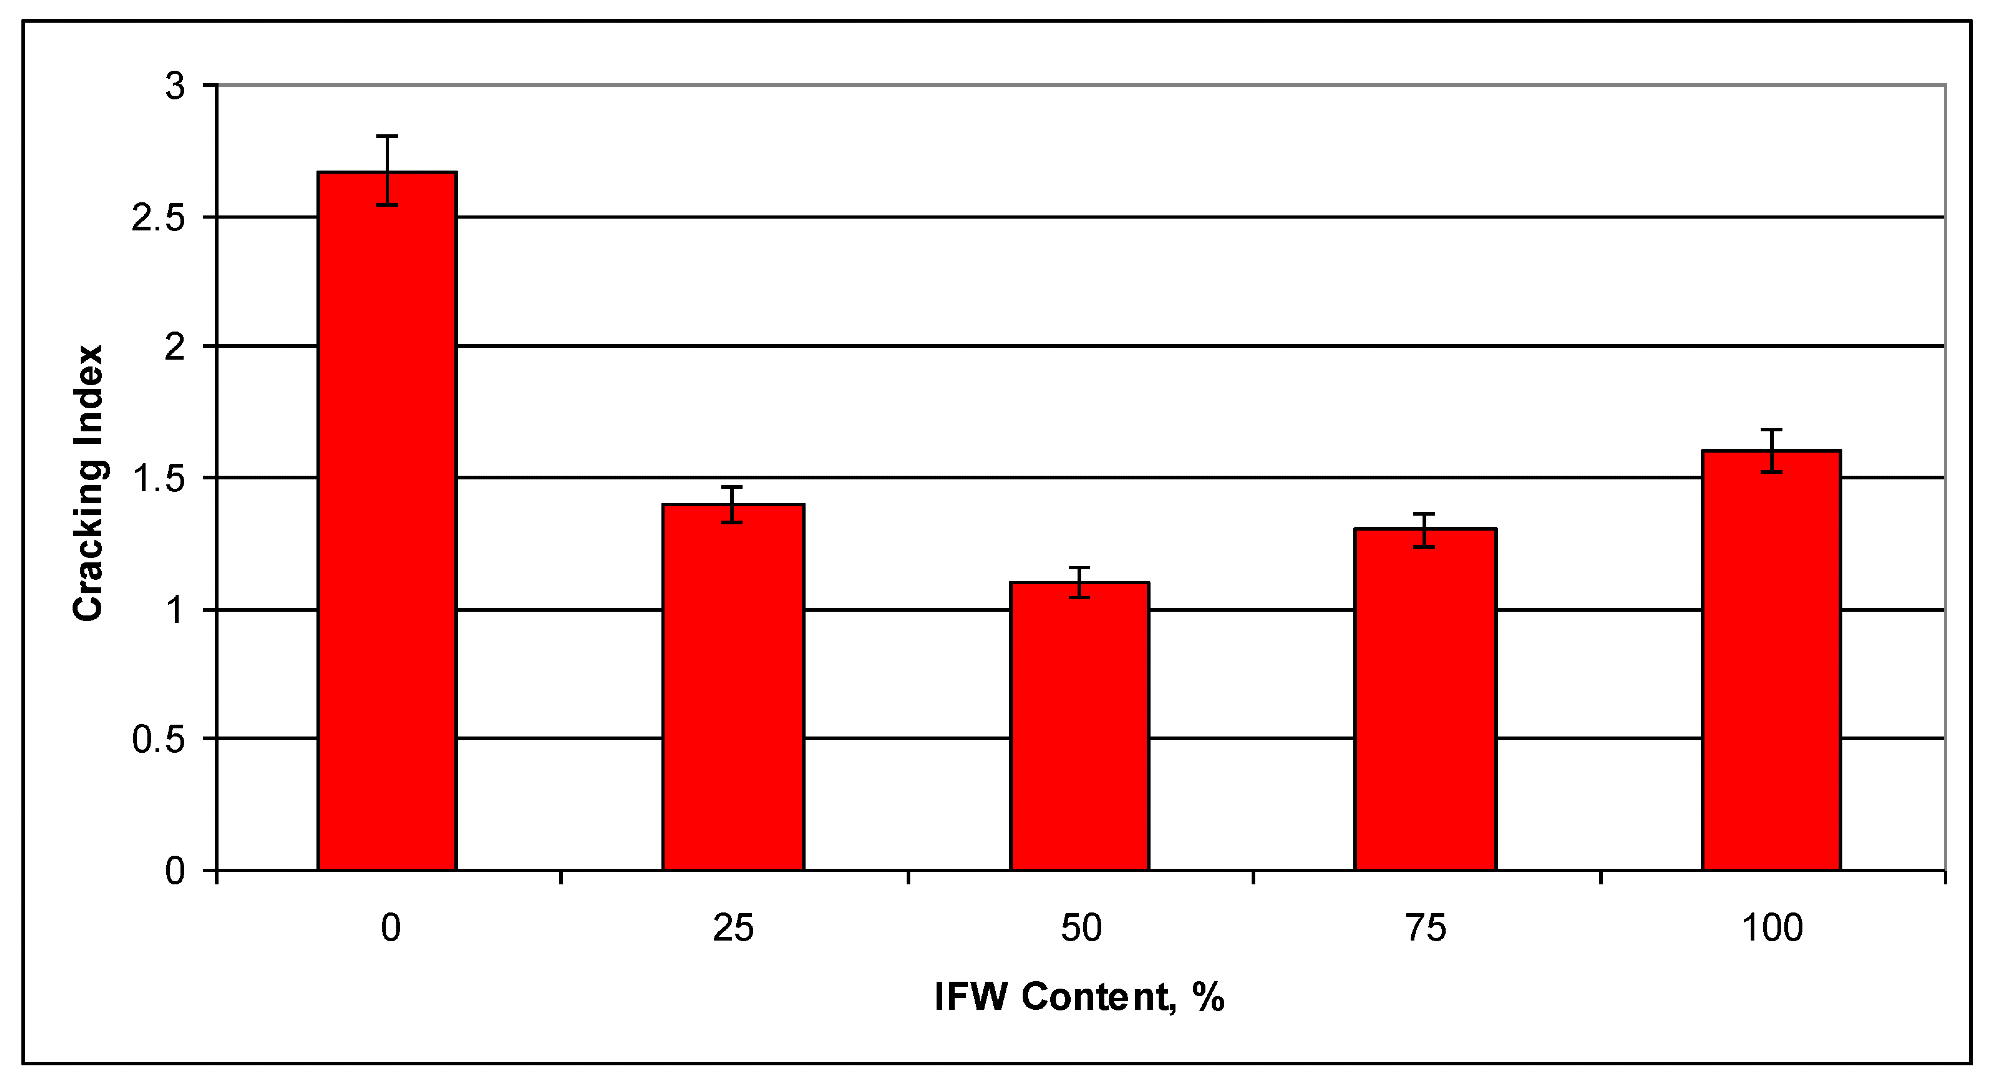 Cracking index for the CM and IFW blends.